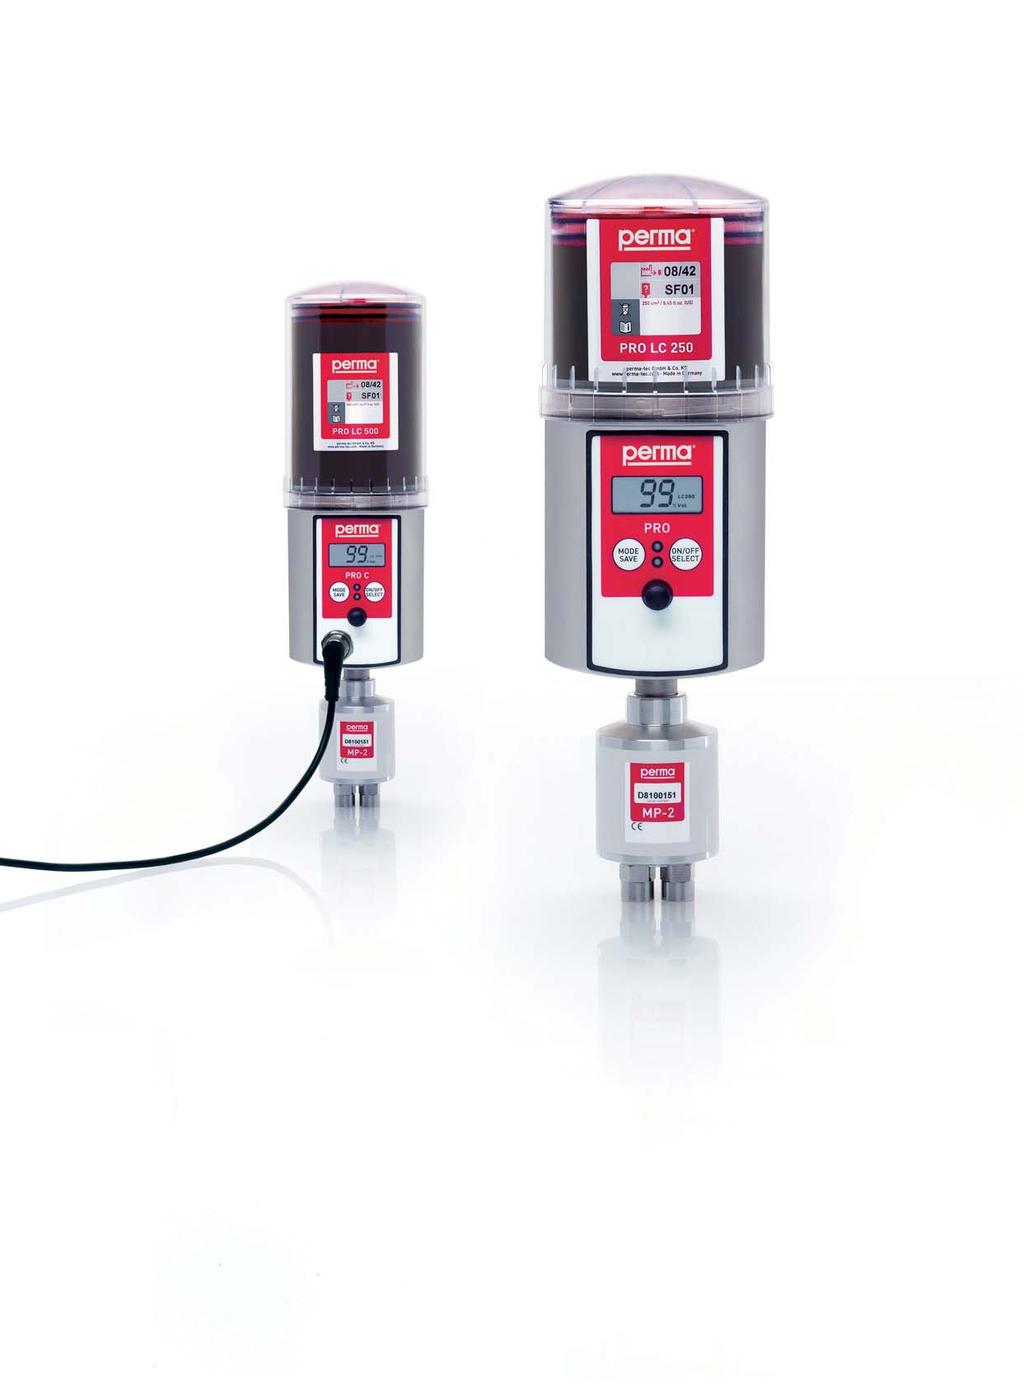 perma PRO MP-2 / PRO C MP-2 The right system for 2 lubrication points Precise lubricant delivery for two lubrication points Both systems, perma PRO MP-2 and PRO C MP-2, consist of a mechanical